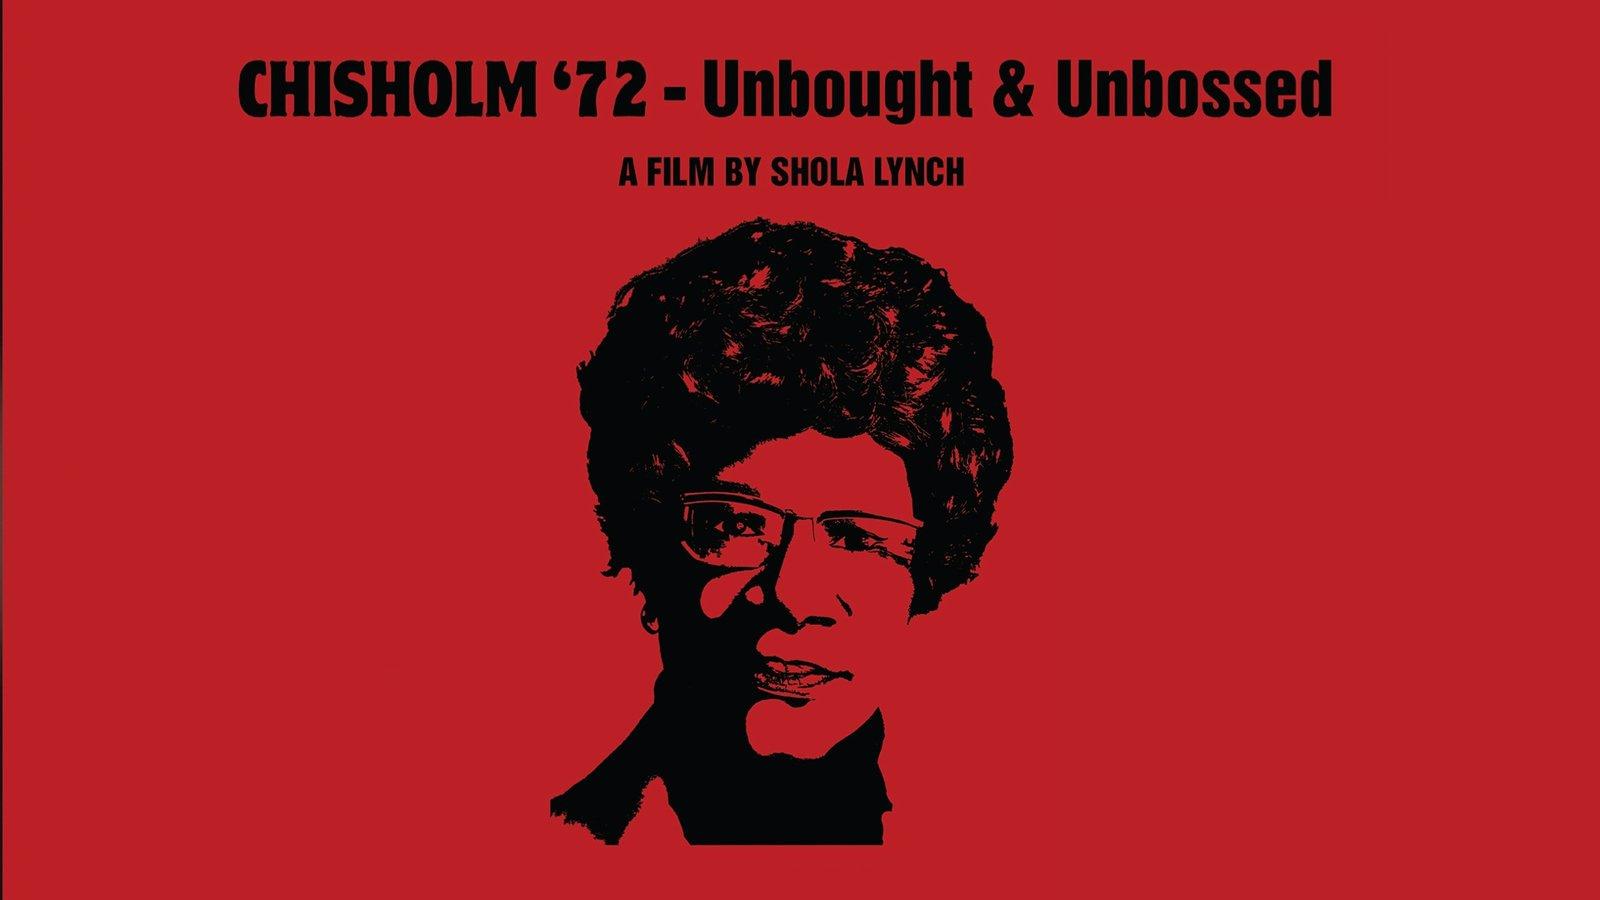 Movie cover art with Shirley Chisholm's face